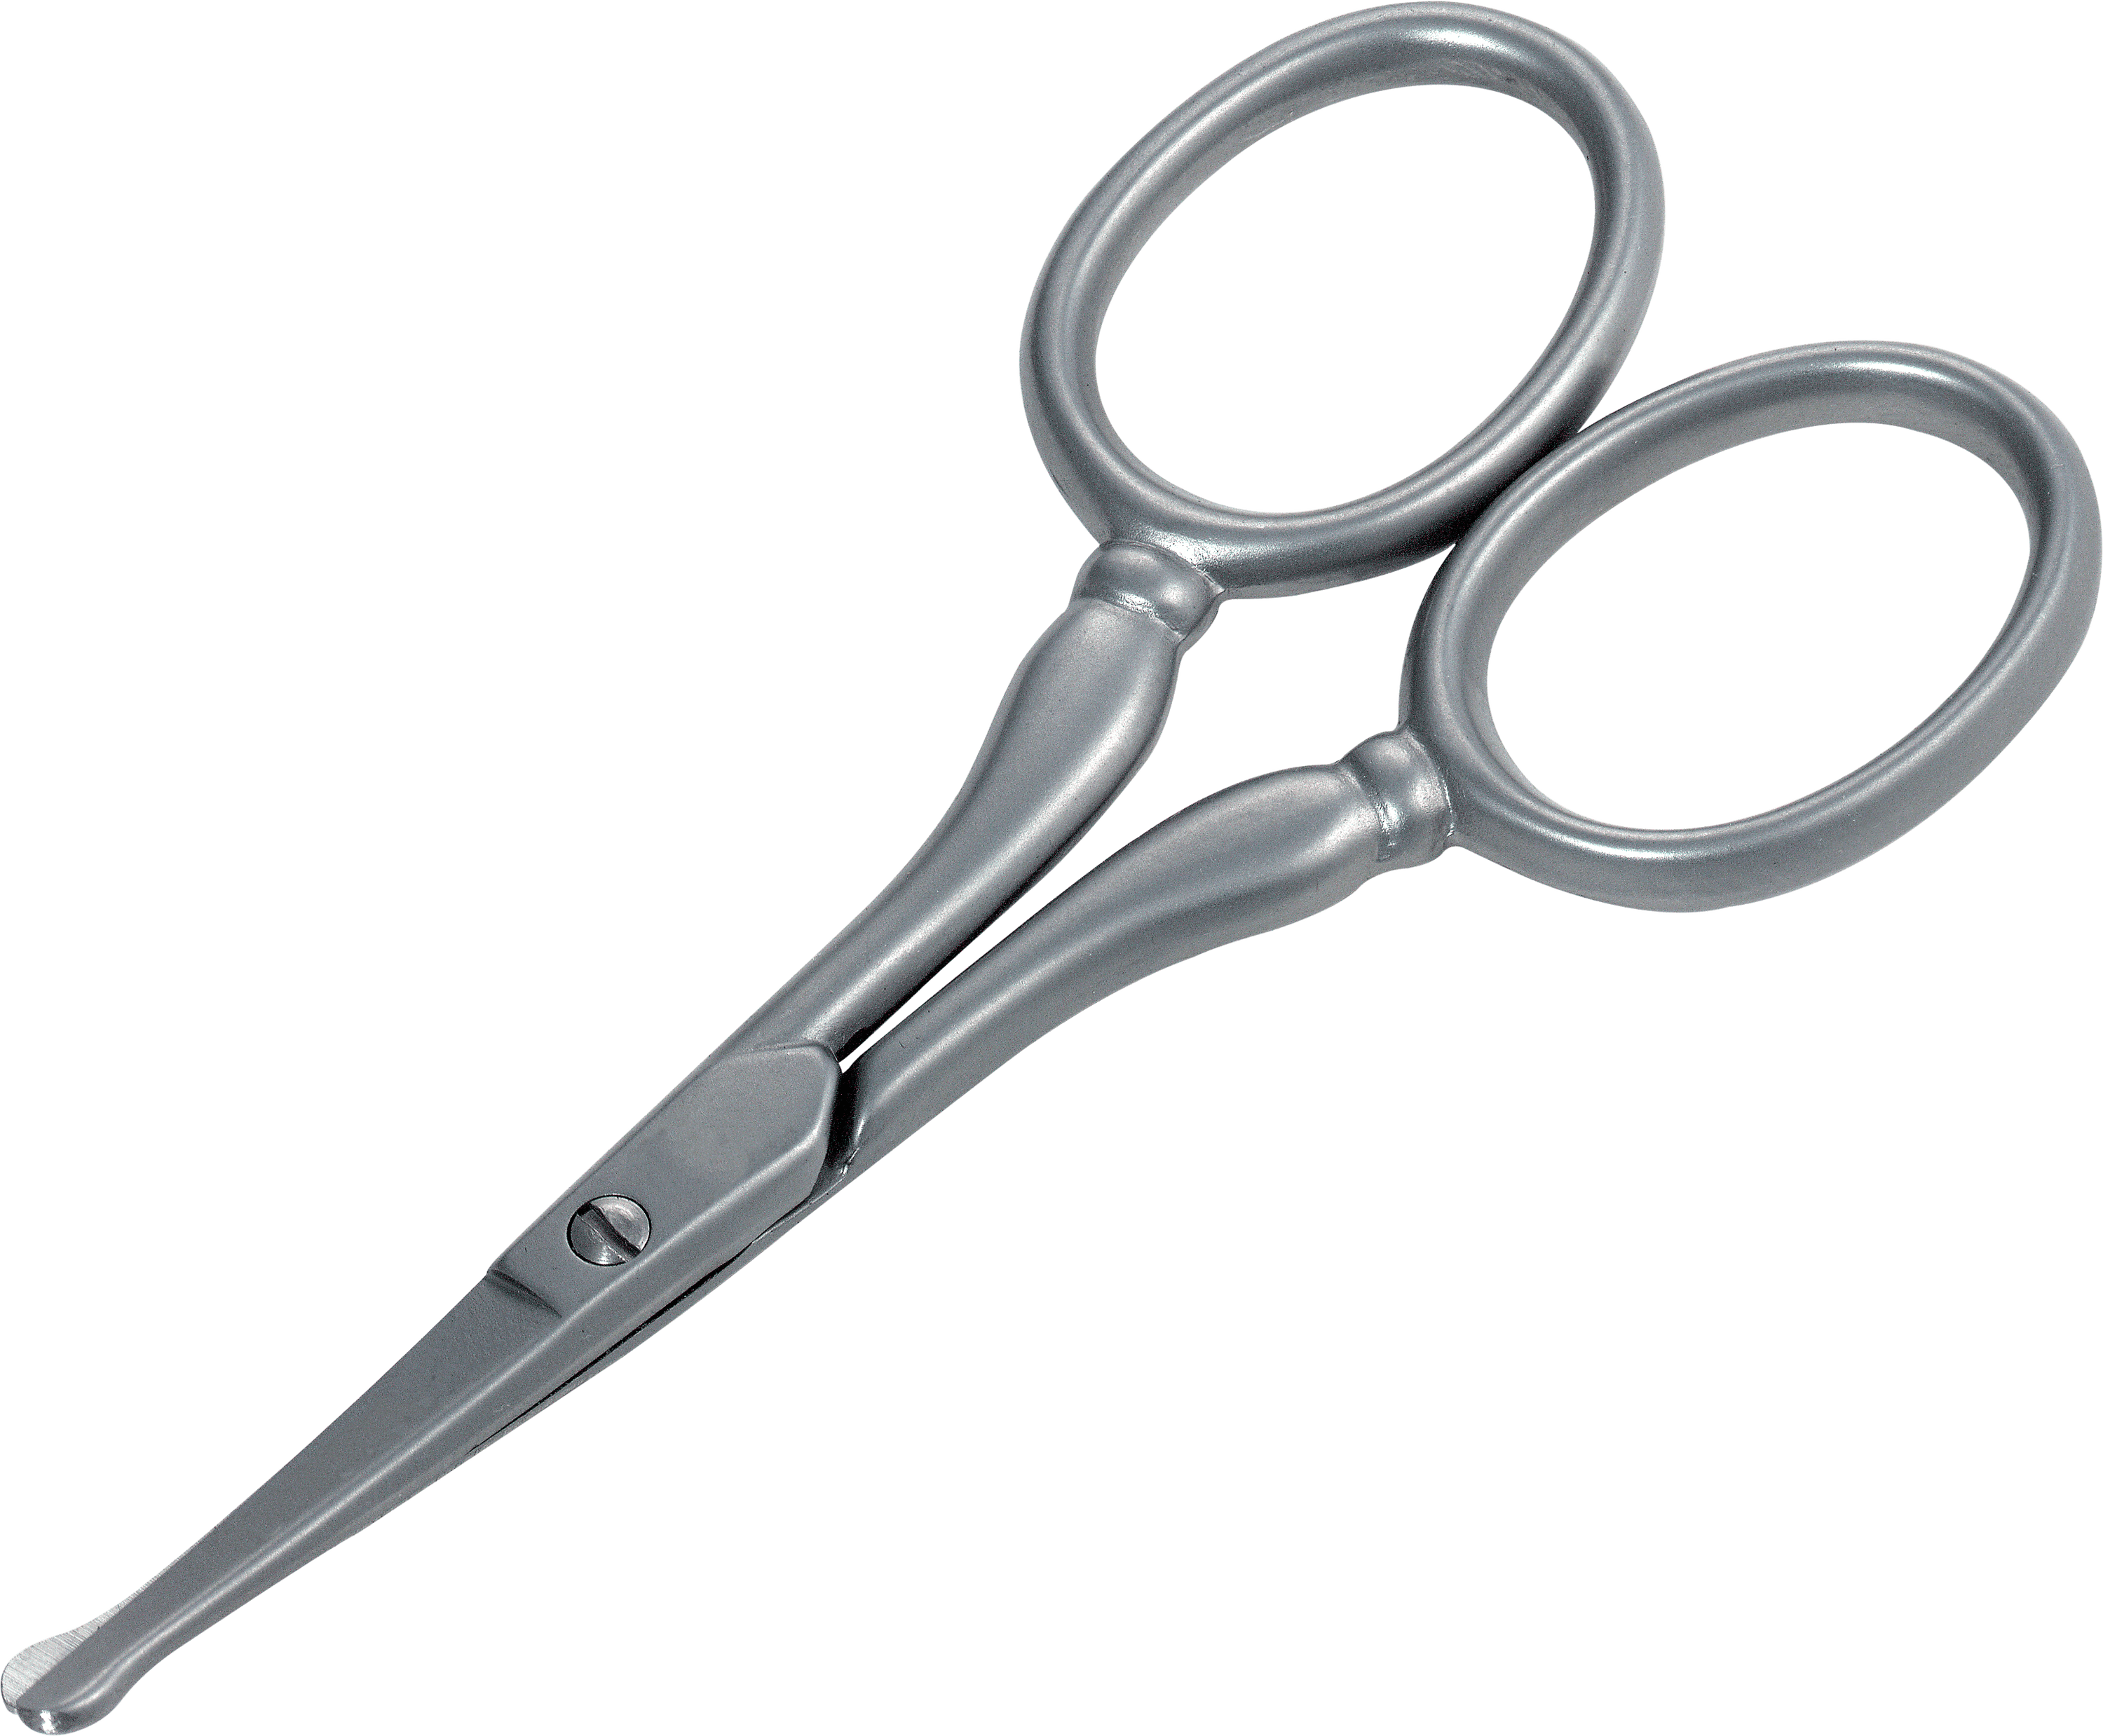 PNG Of A Pair Of Scissors - 158667